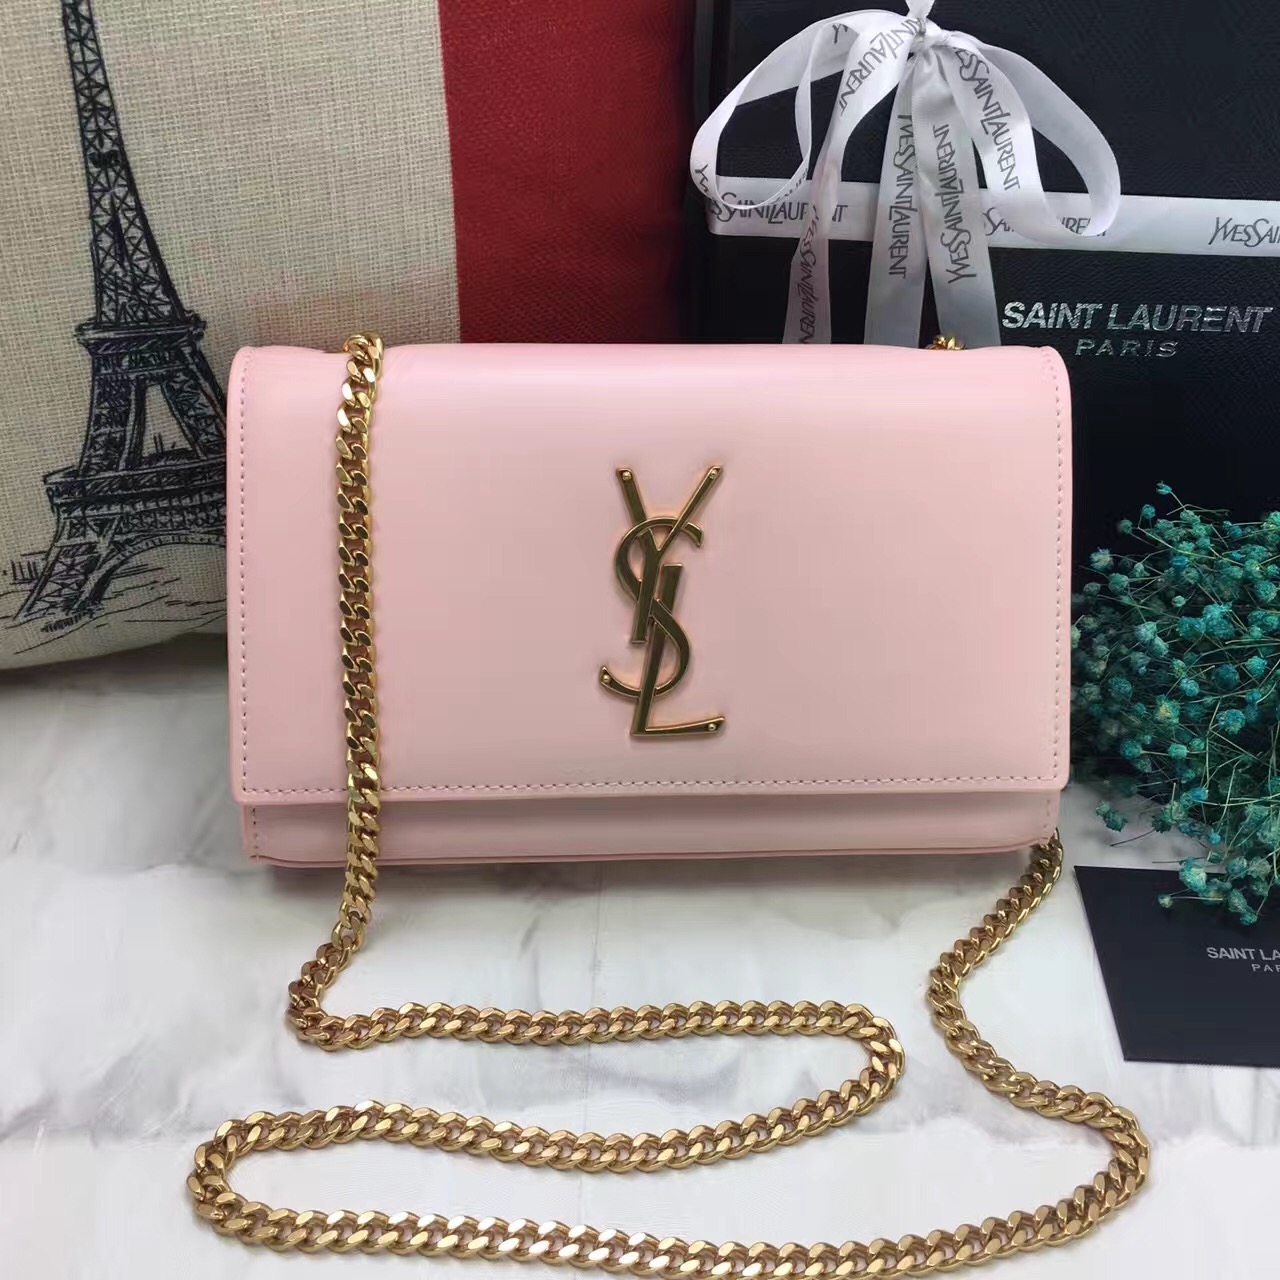 YSL Smooth Leather Chain Bag 22cm Light Pink [YSL2017-1731] - $216.50 ...